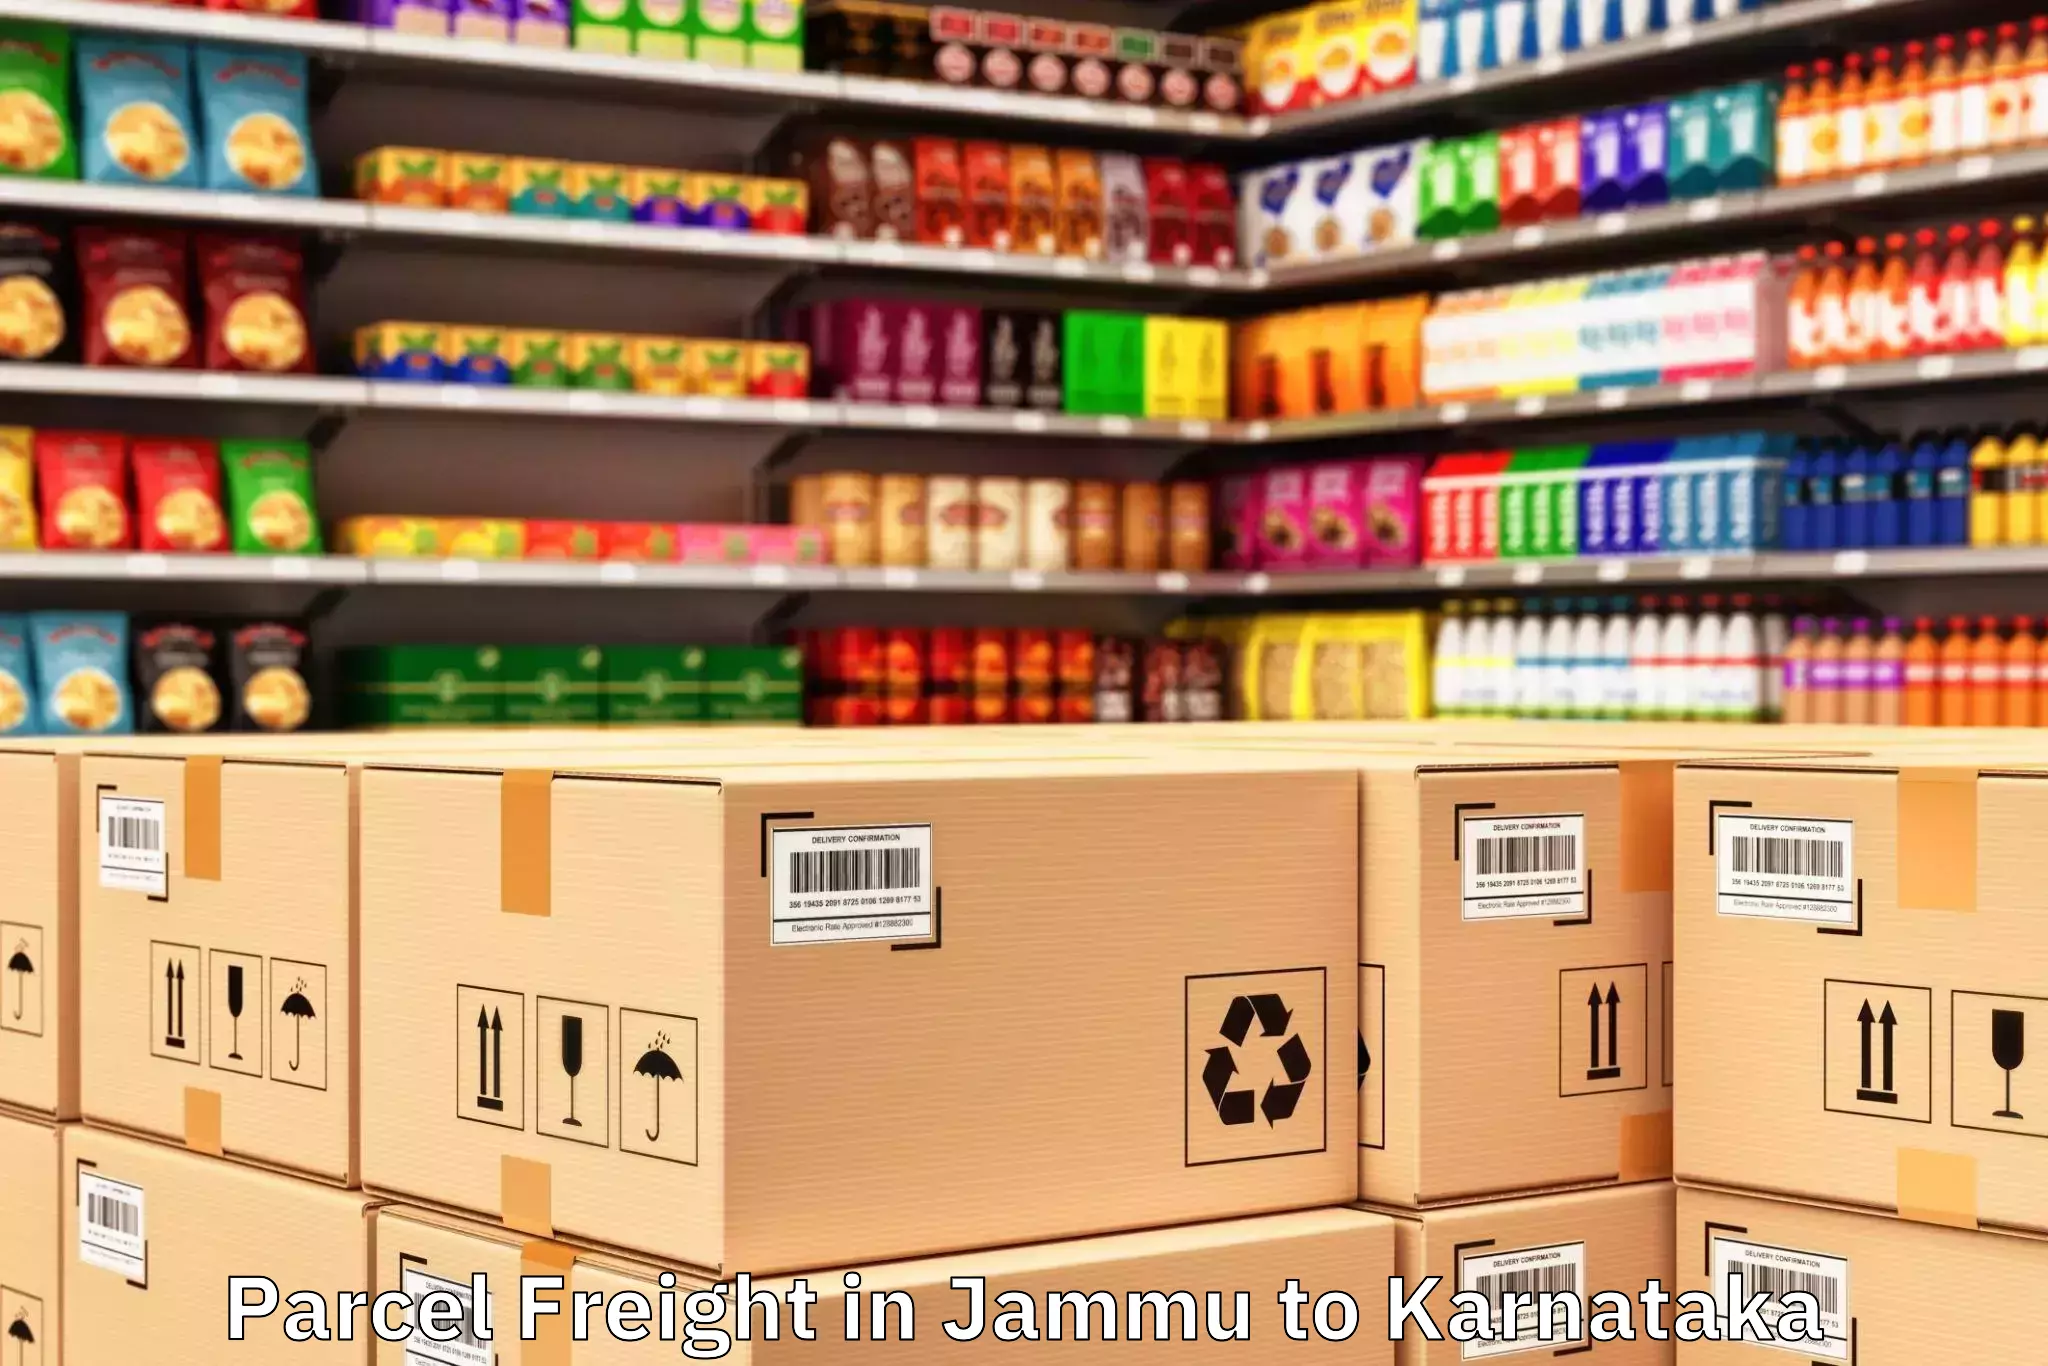 Top Jammu to Bandipur Parcel Freight Available